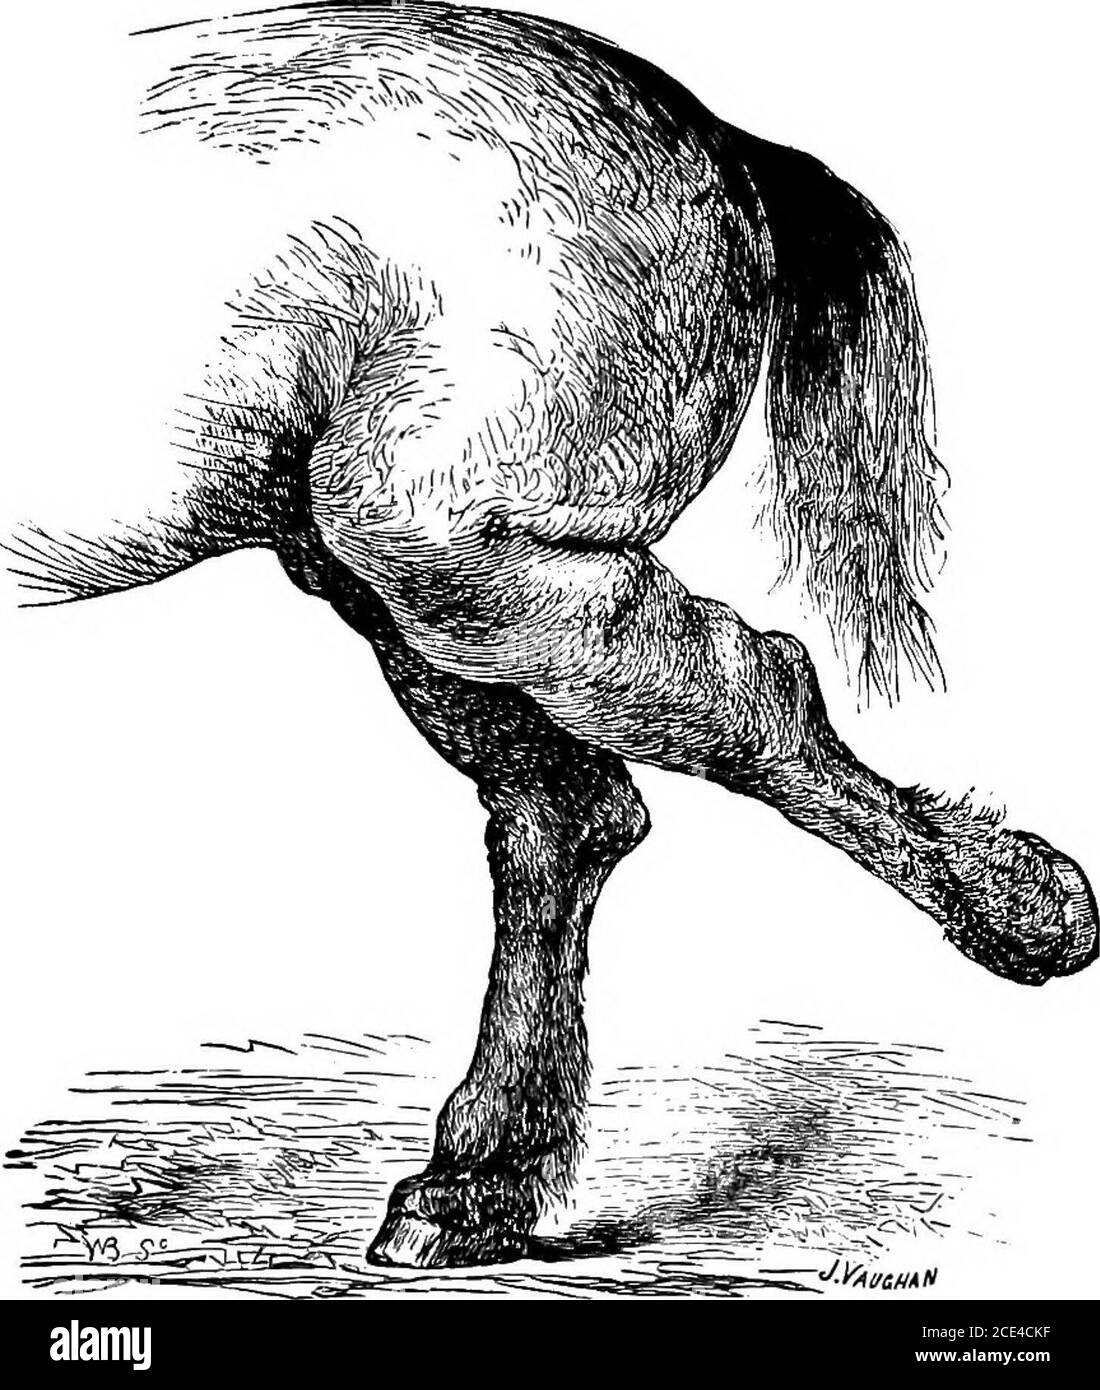 . The principles and practice of veterinary surgery . t of the stifle or the gastrocnemii were injured,the tendo-achilles fell into a relaxed condition when the limbwas elevated from the ground. Figure 49 is from life, drawn by Professor Vaughan, whena student of the College. The horse was an ill-lookinglong-legged cart-horse, very subject to rheumatic attacks, forwhich Mr. Cunningham of Slateford had repeatedly attendedhim. Towards the end of 1871 he was found one morning tobe very lame, and when he attempted to move, the near hindleg was thrown upwards and backwards with great violence; atth Stock Photo